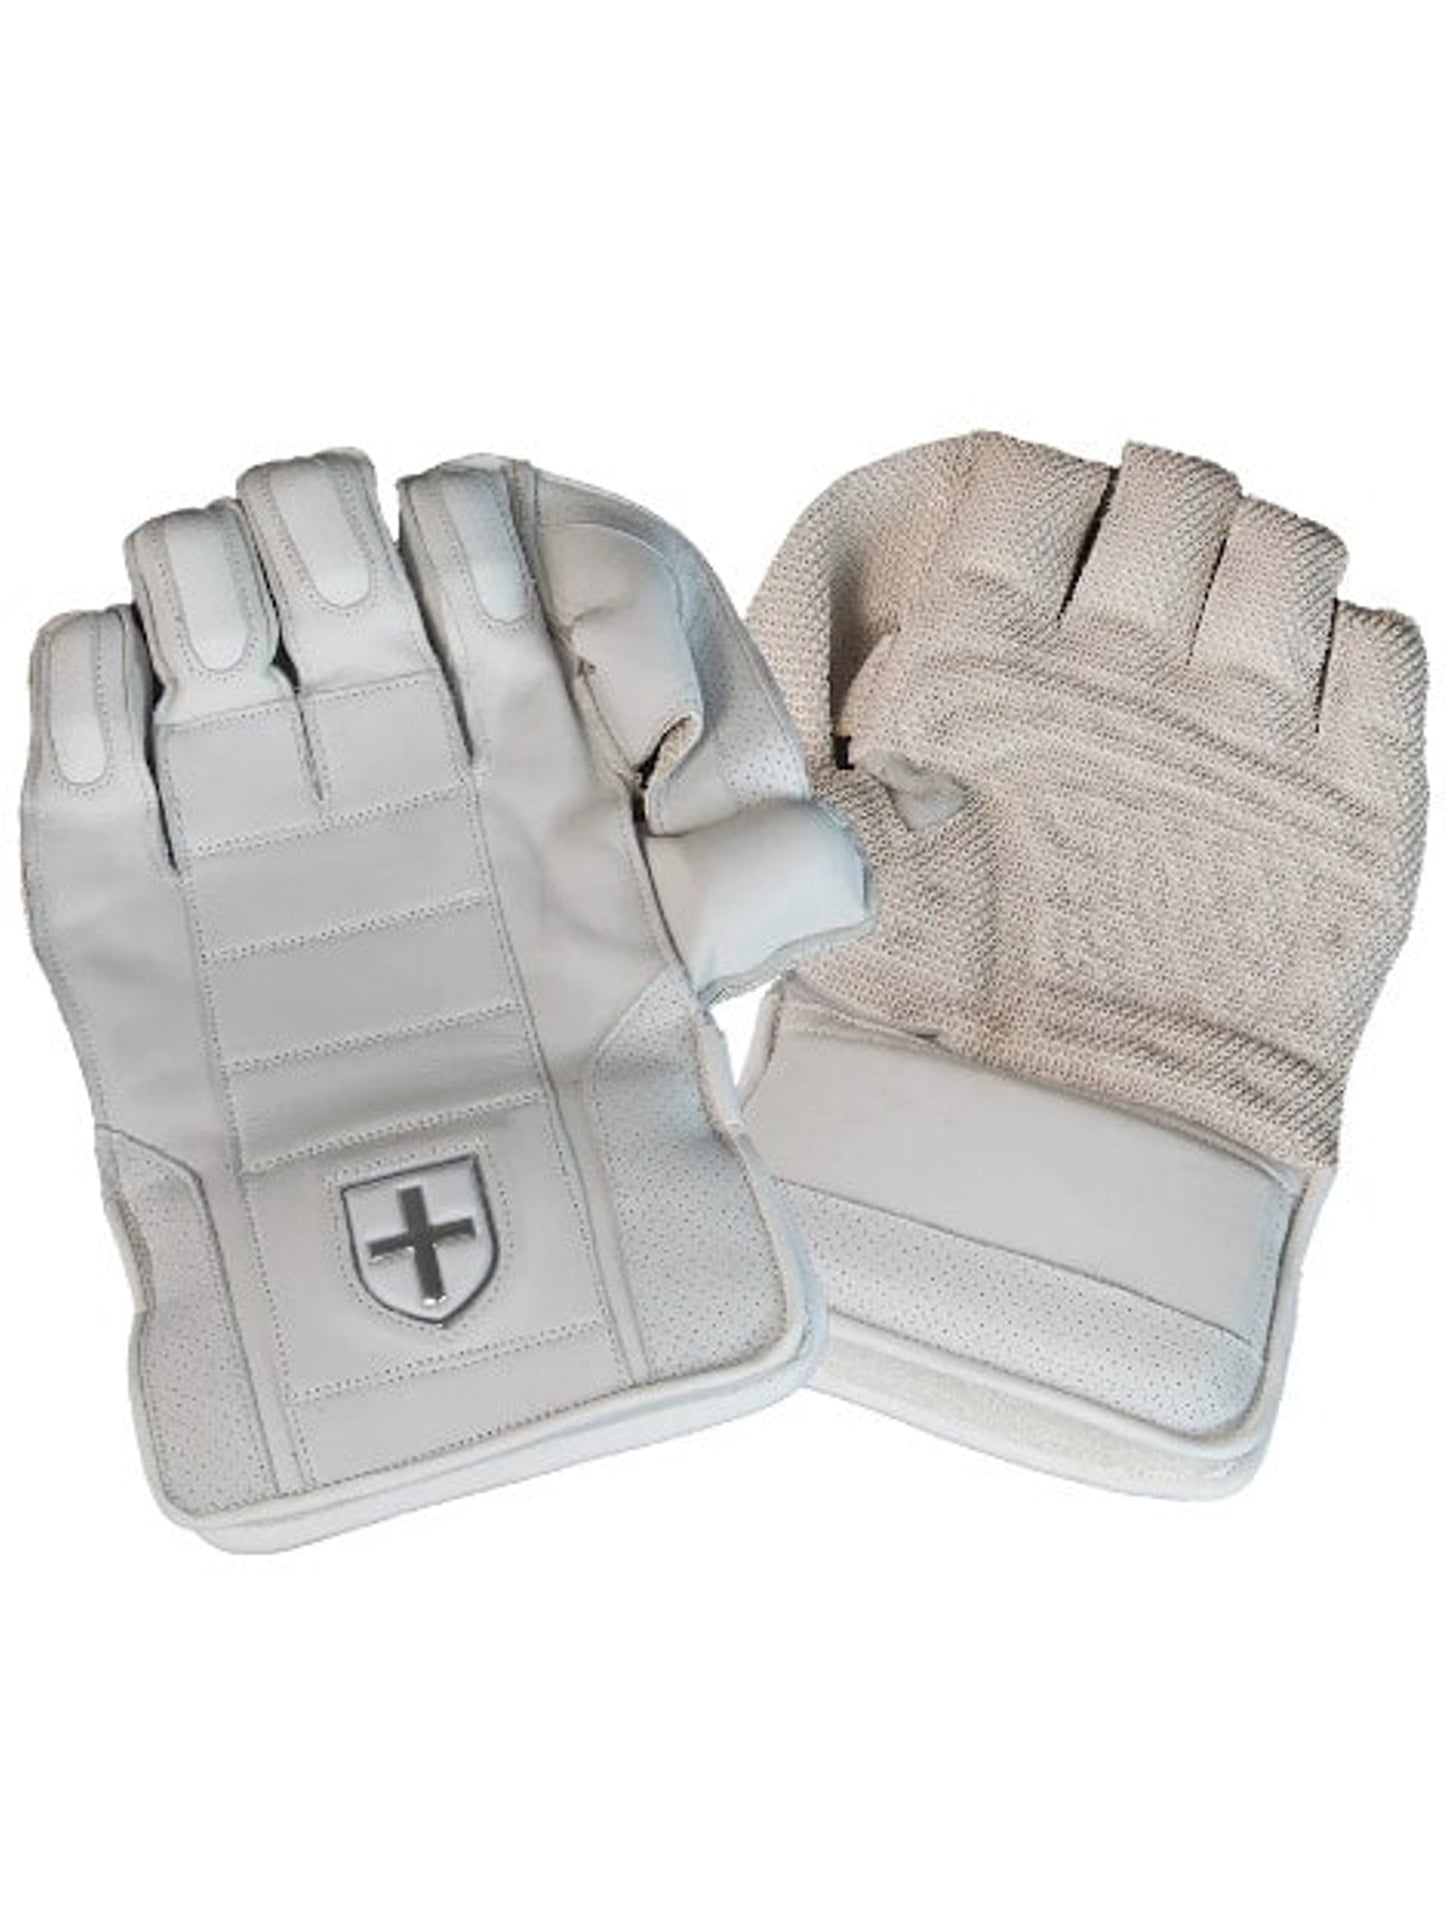 Focus Pro Wicket Keeping Gloves